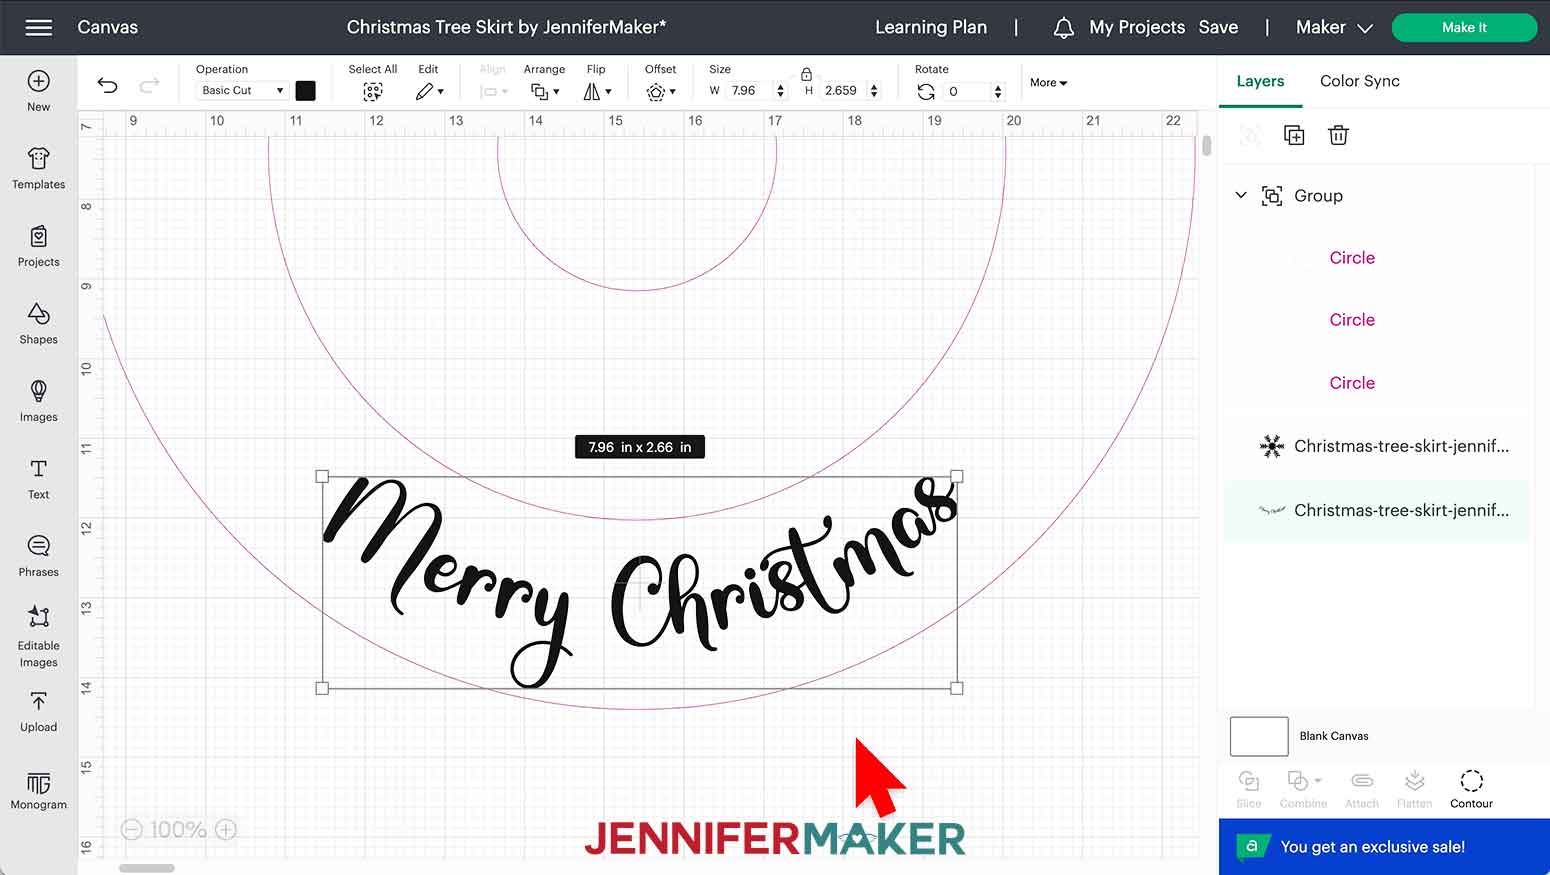 Merry Christmas SVG moved over template to confirm appropriate sizing.